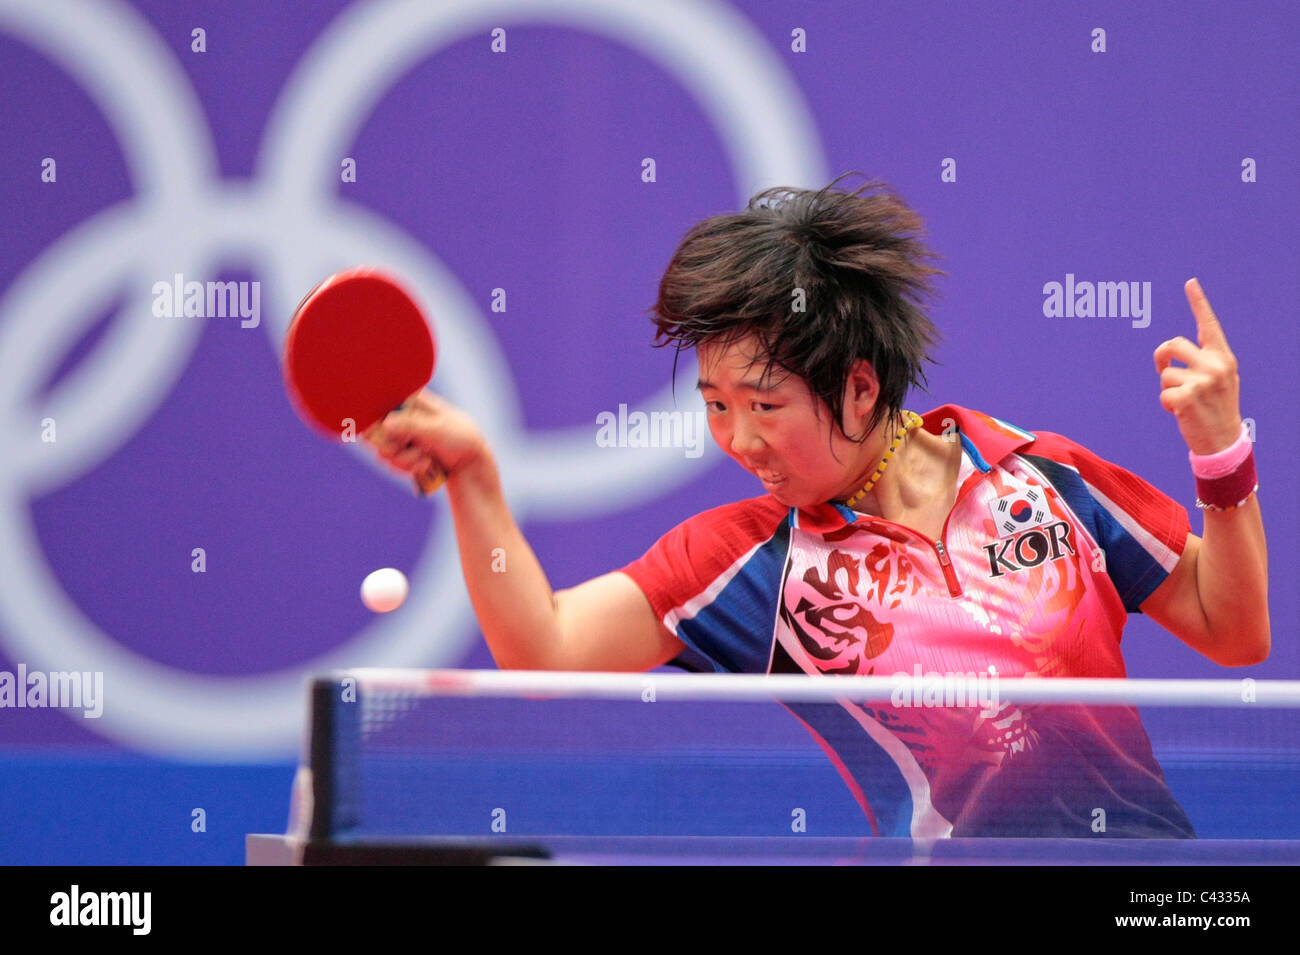 Yang Ha Eun of Team Korea competing in the 2010 Singapore Youth Olympic Games Table Tennis Mixed Team Finals. Stock Photo